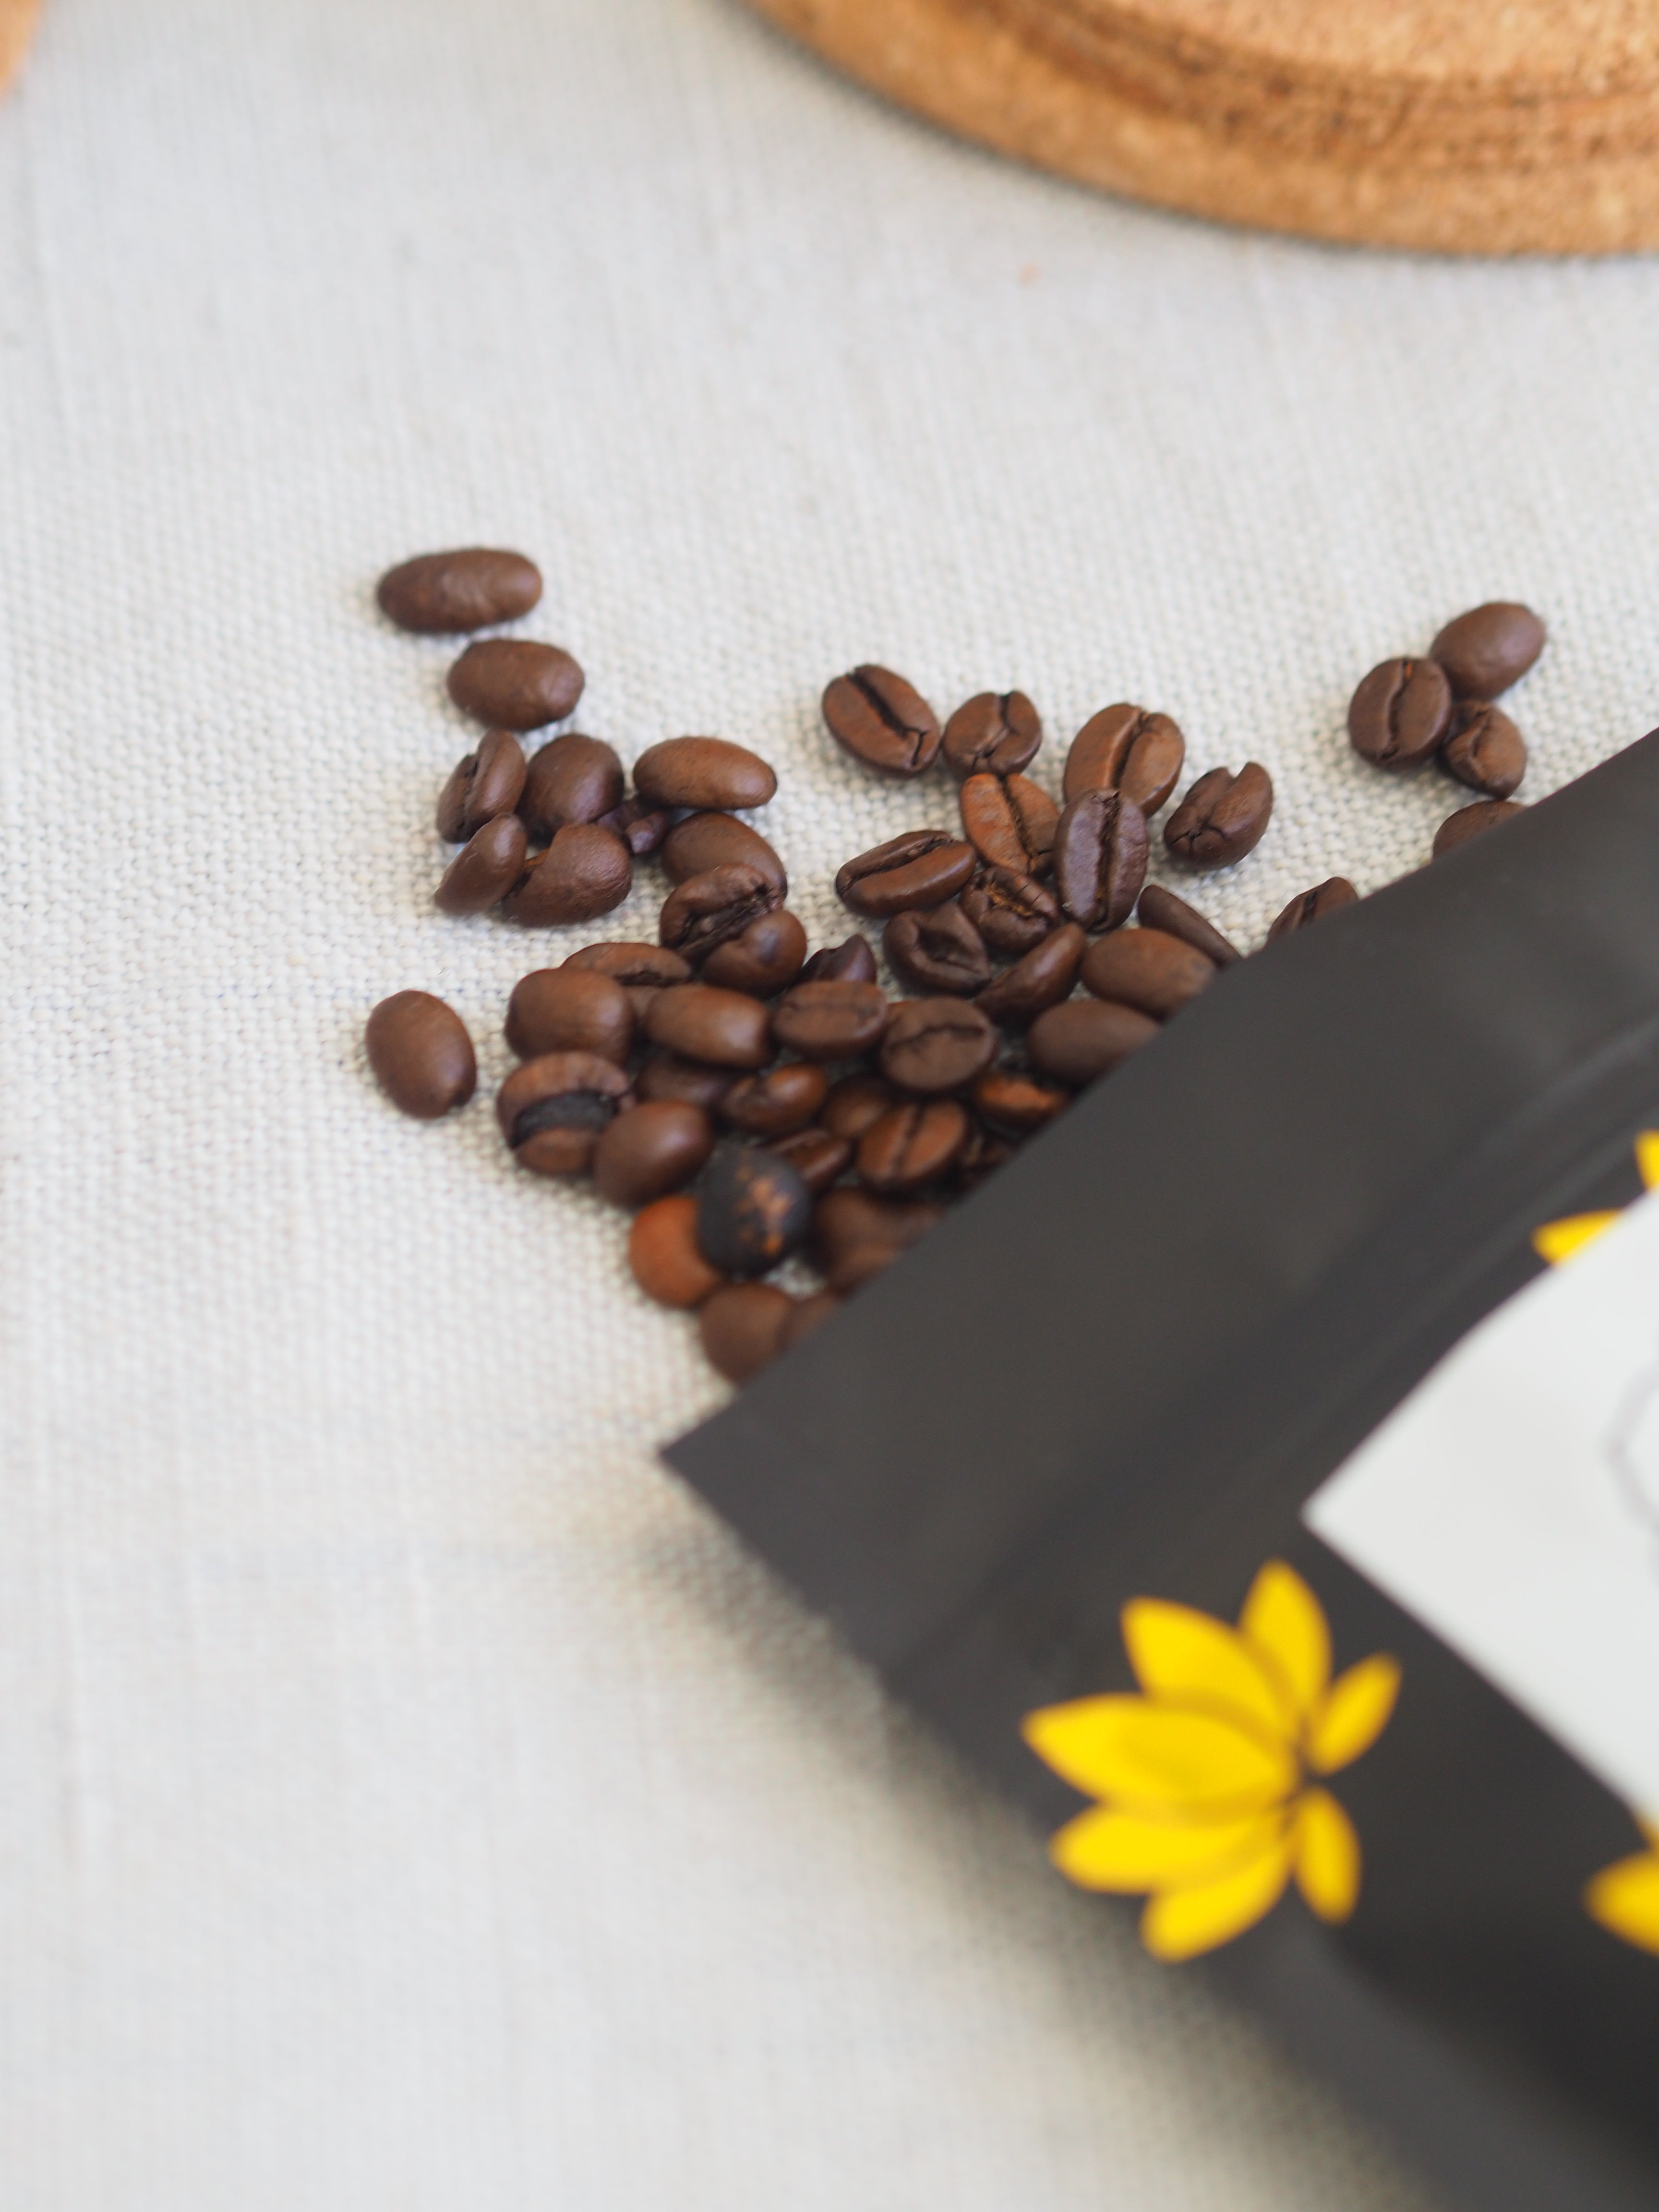 Superfood vs Conventional Coffee - which is better?